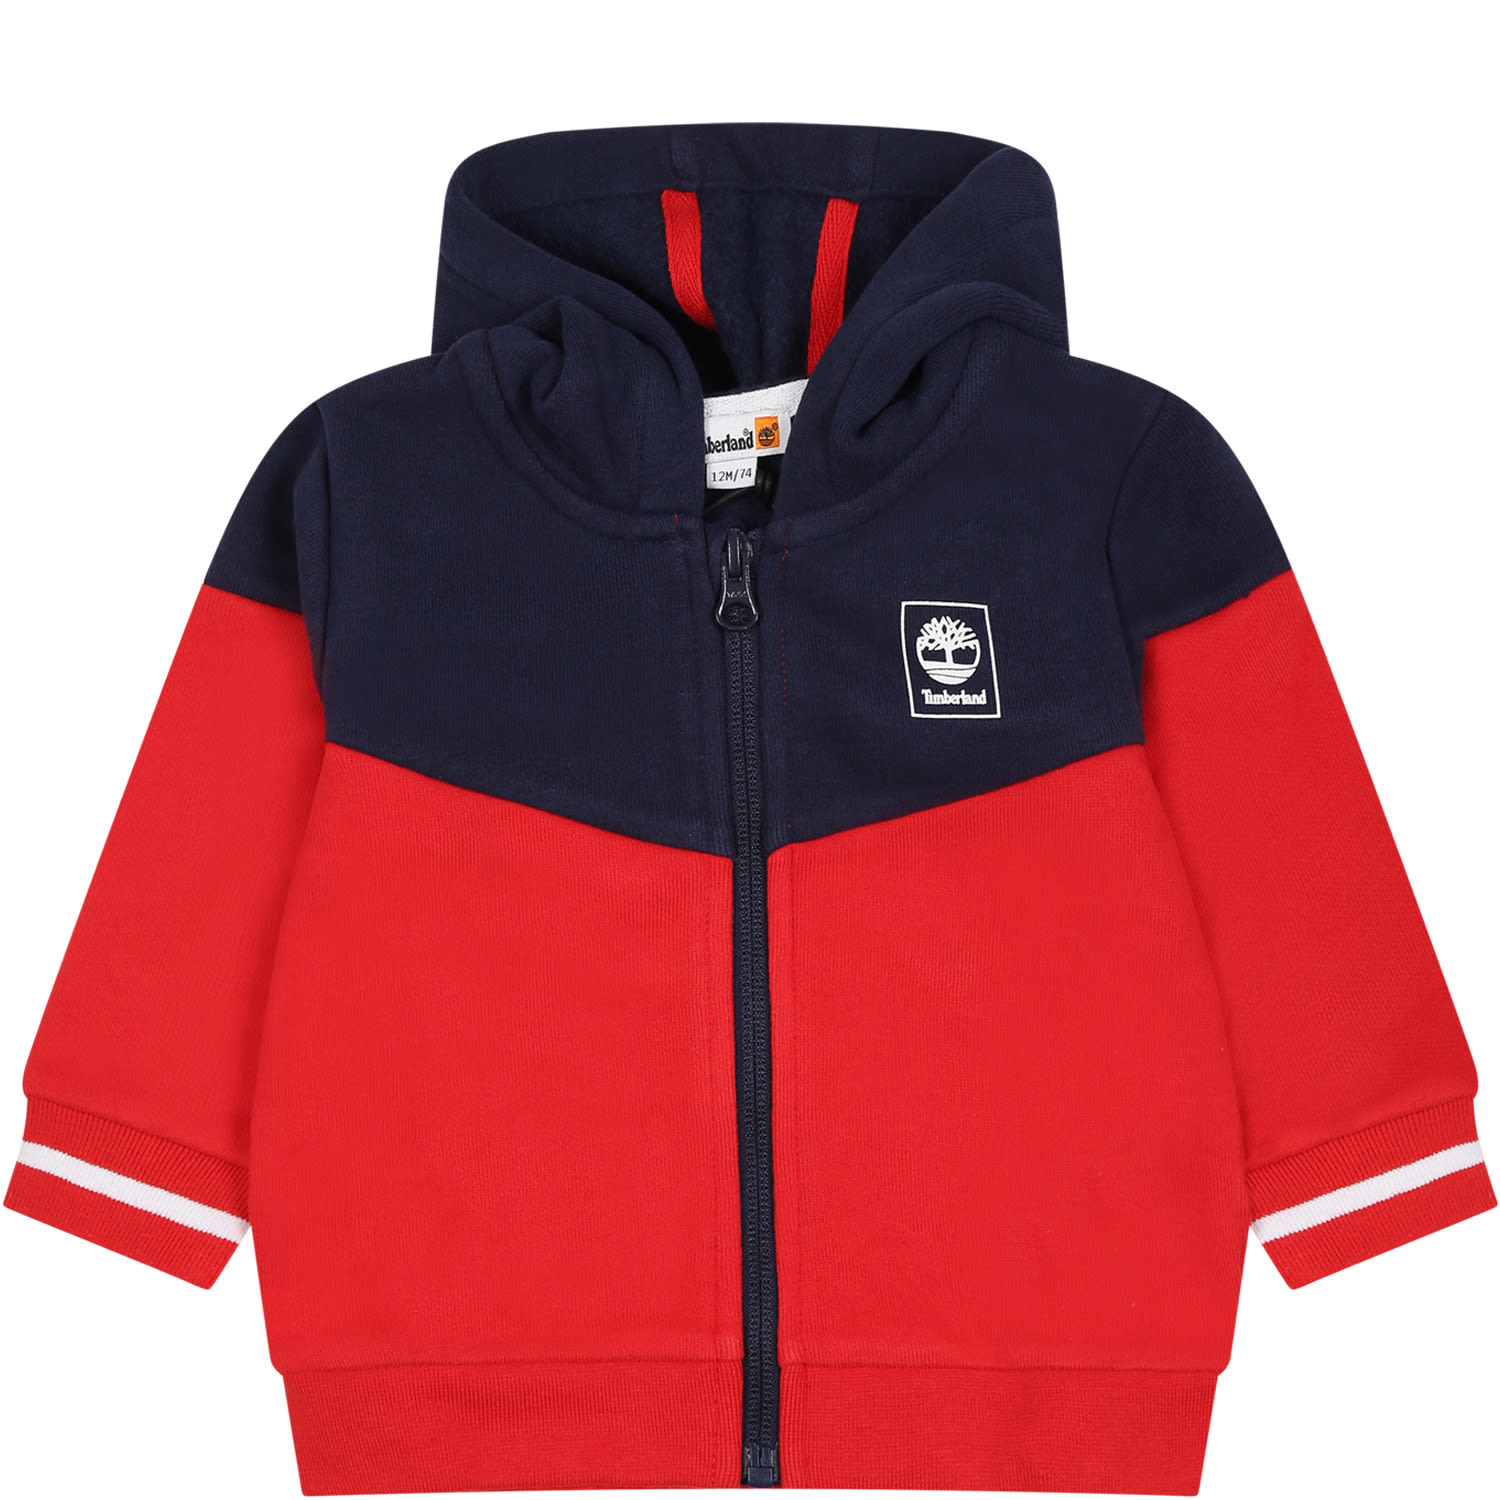 Timberland Red Sweatshirt For Baby Boy With Printed Logo